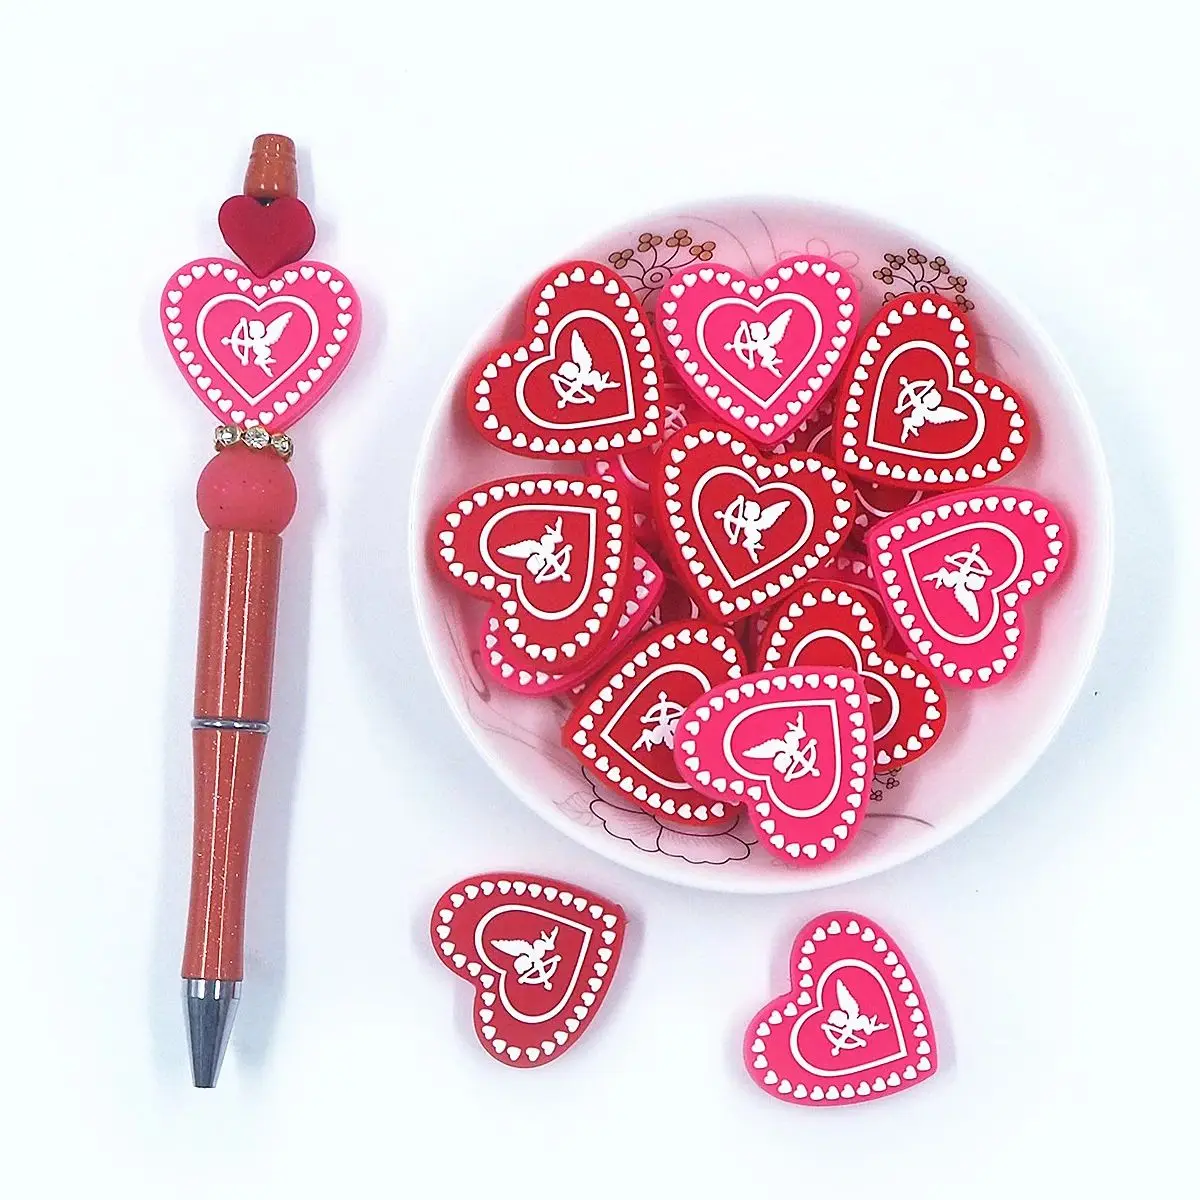 

Chenkai 50PCS Heart Cupid Silicone Focal Beads For Beadable Pen Valentine's Day Silicone Charms for Pen Making Character Beads